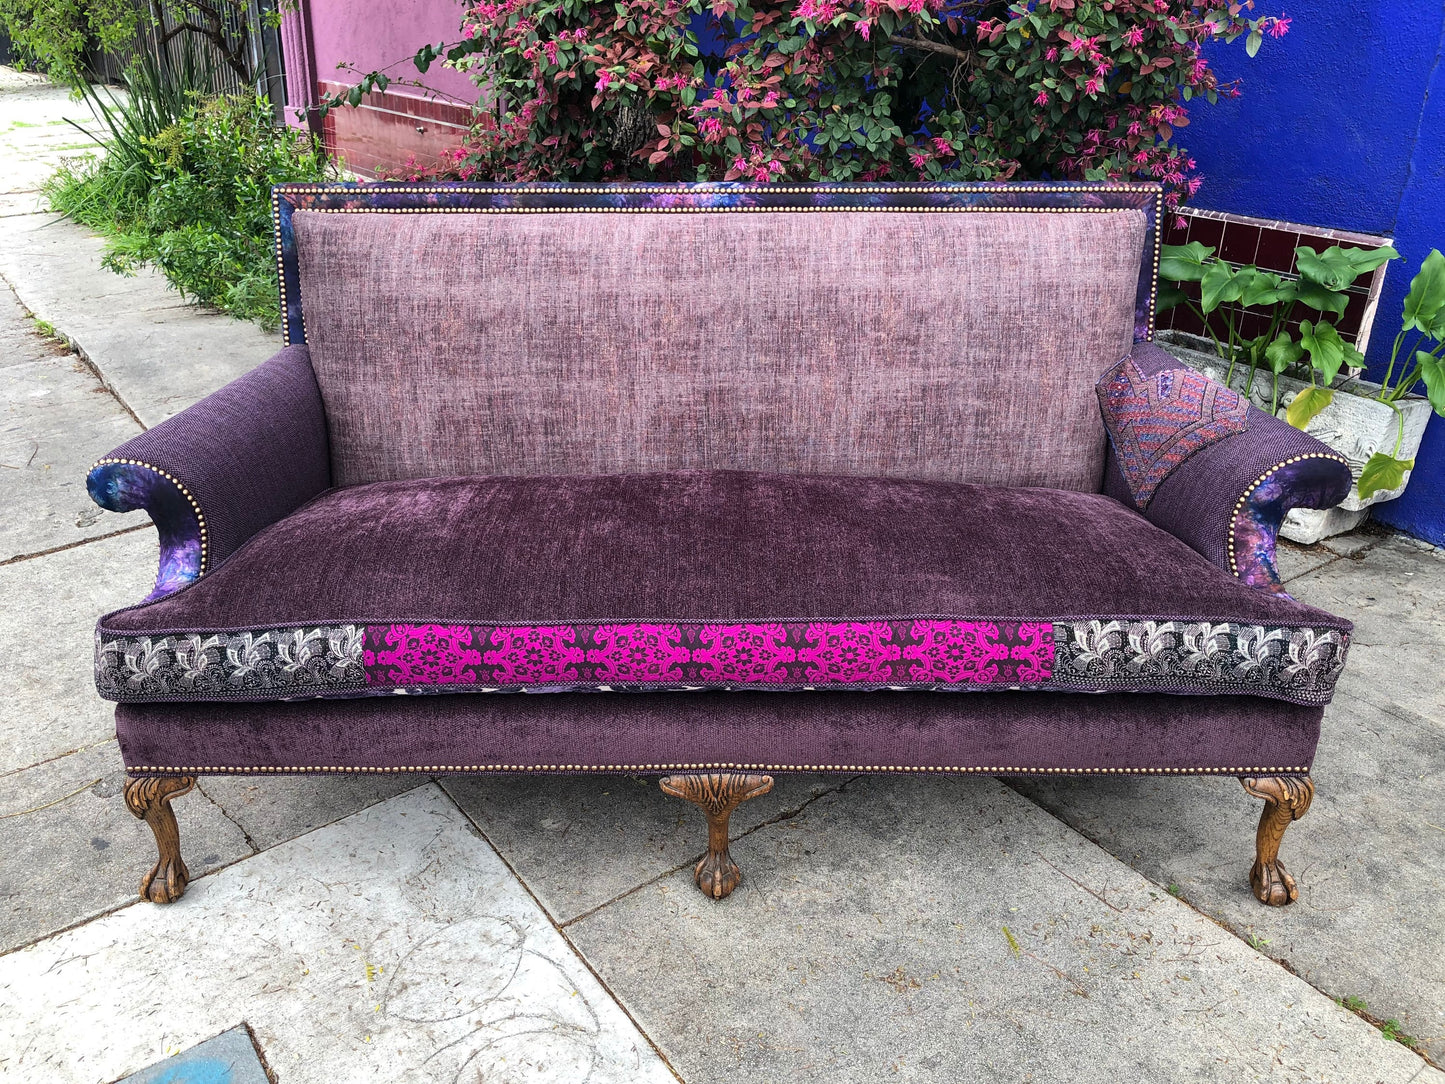 Recycled Reupholstered 1980s Sofa in Shades of Plum